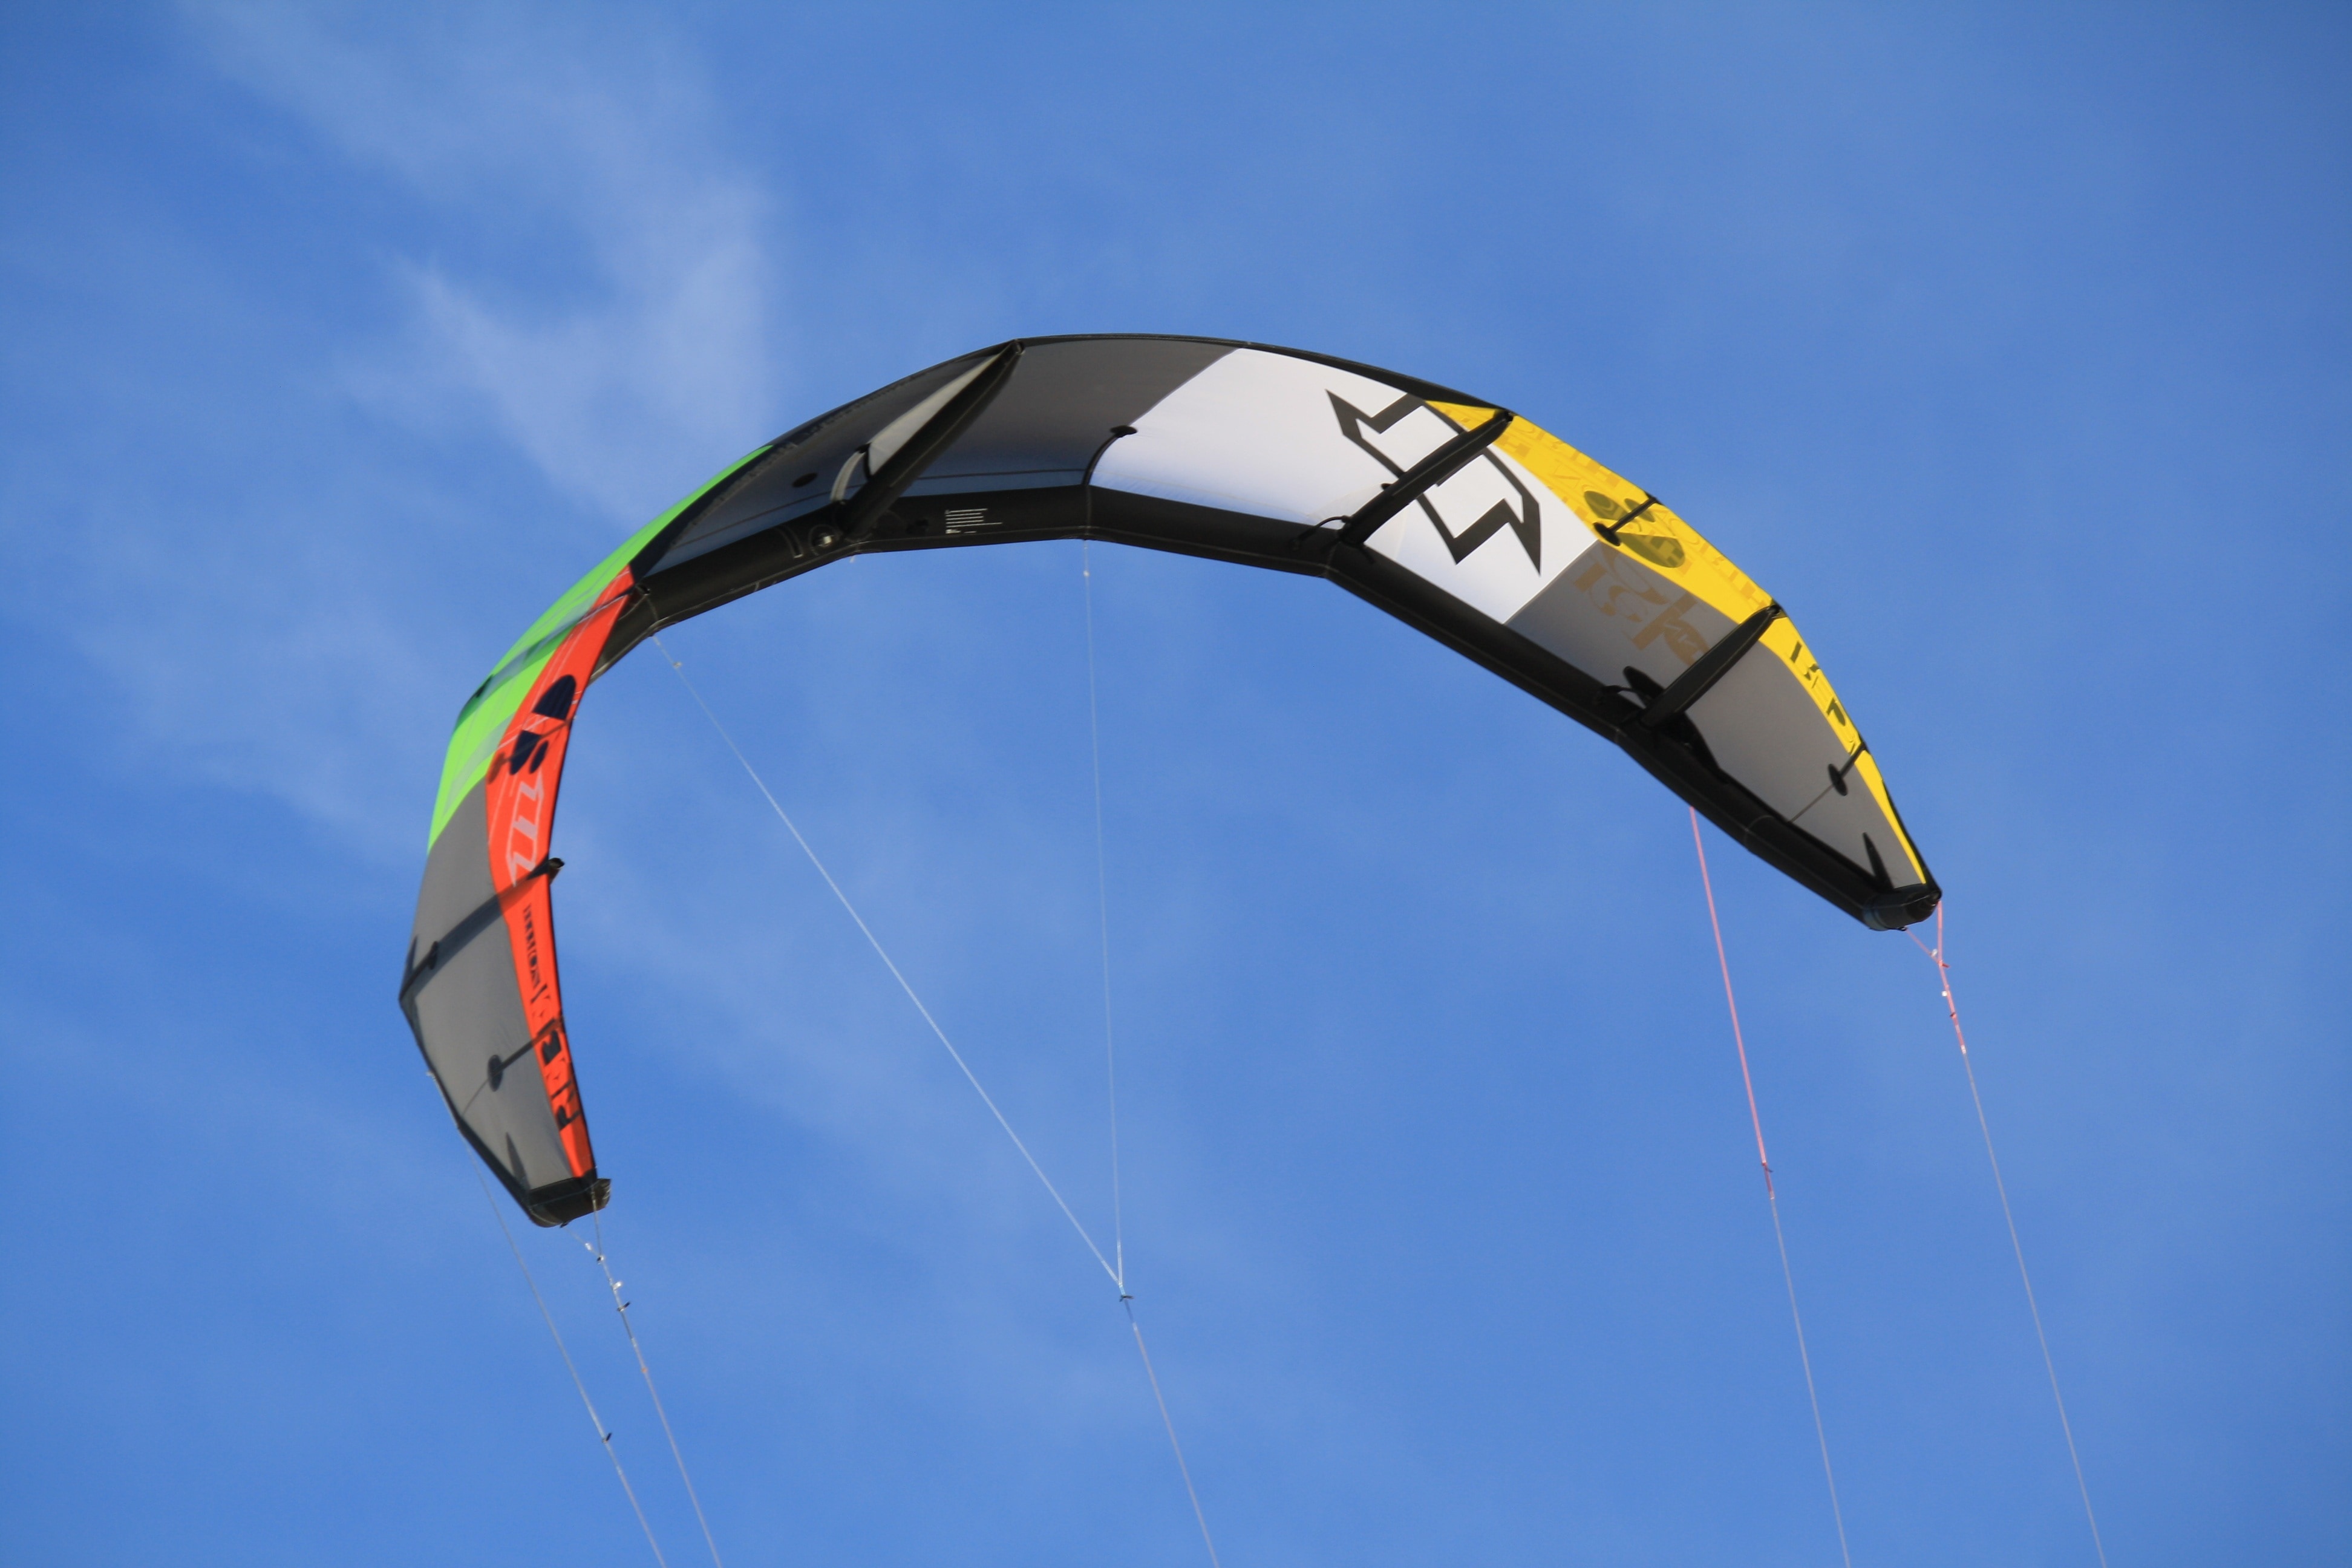 Screen, Colorful, Kiting, Kite, Fly, sport, blue